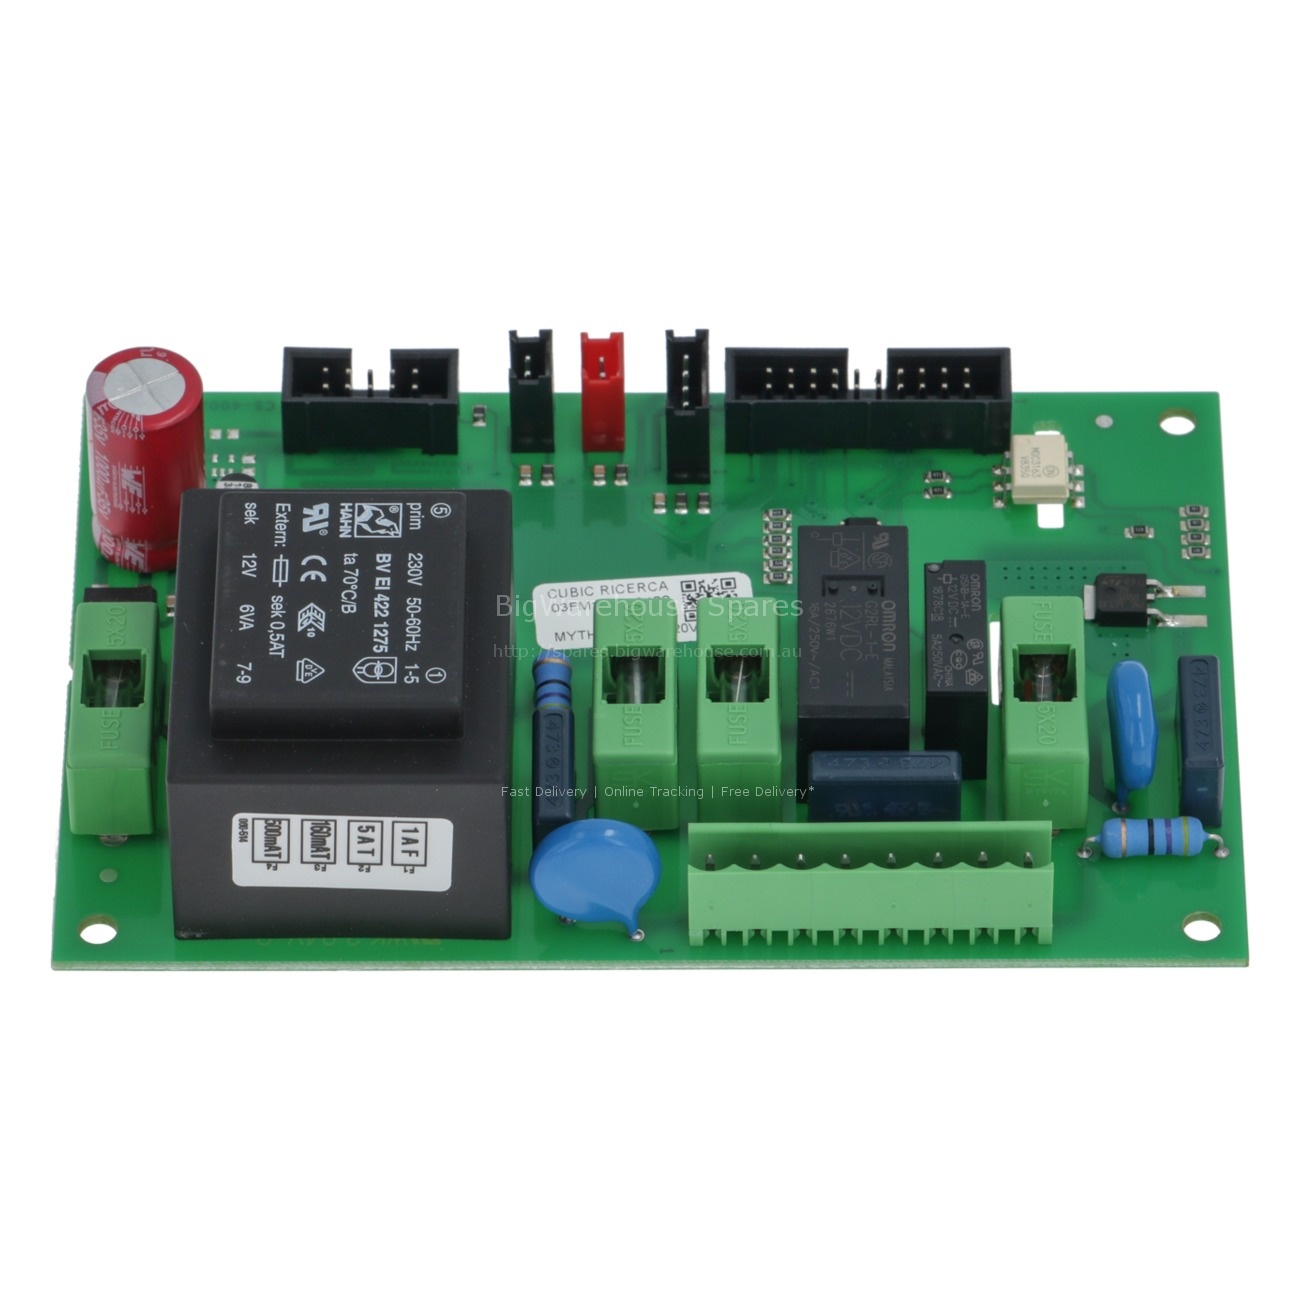 POWER SUPPLY ELECTRONIC BOARD 220V